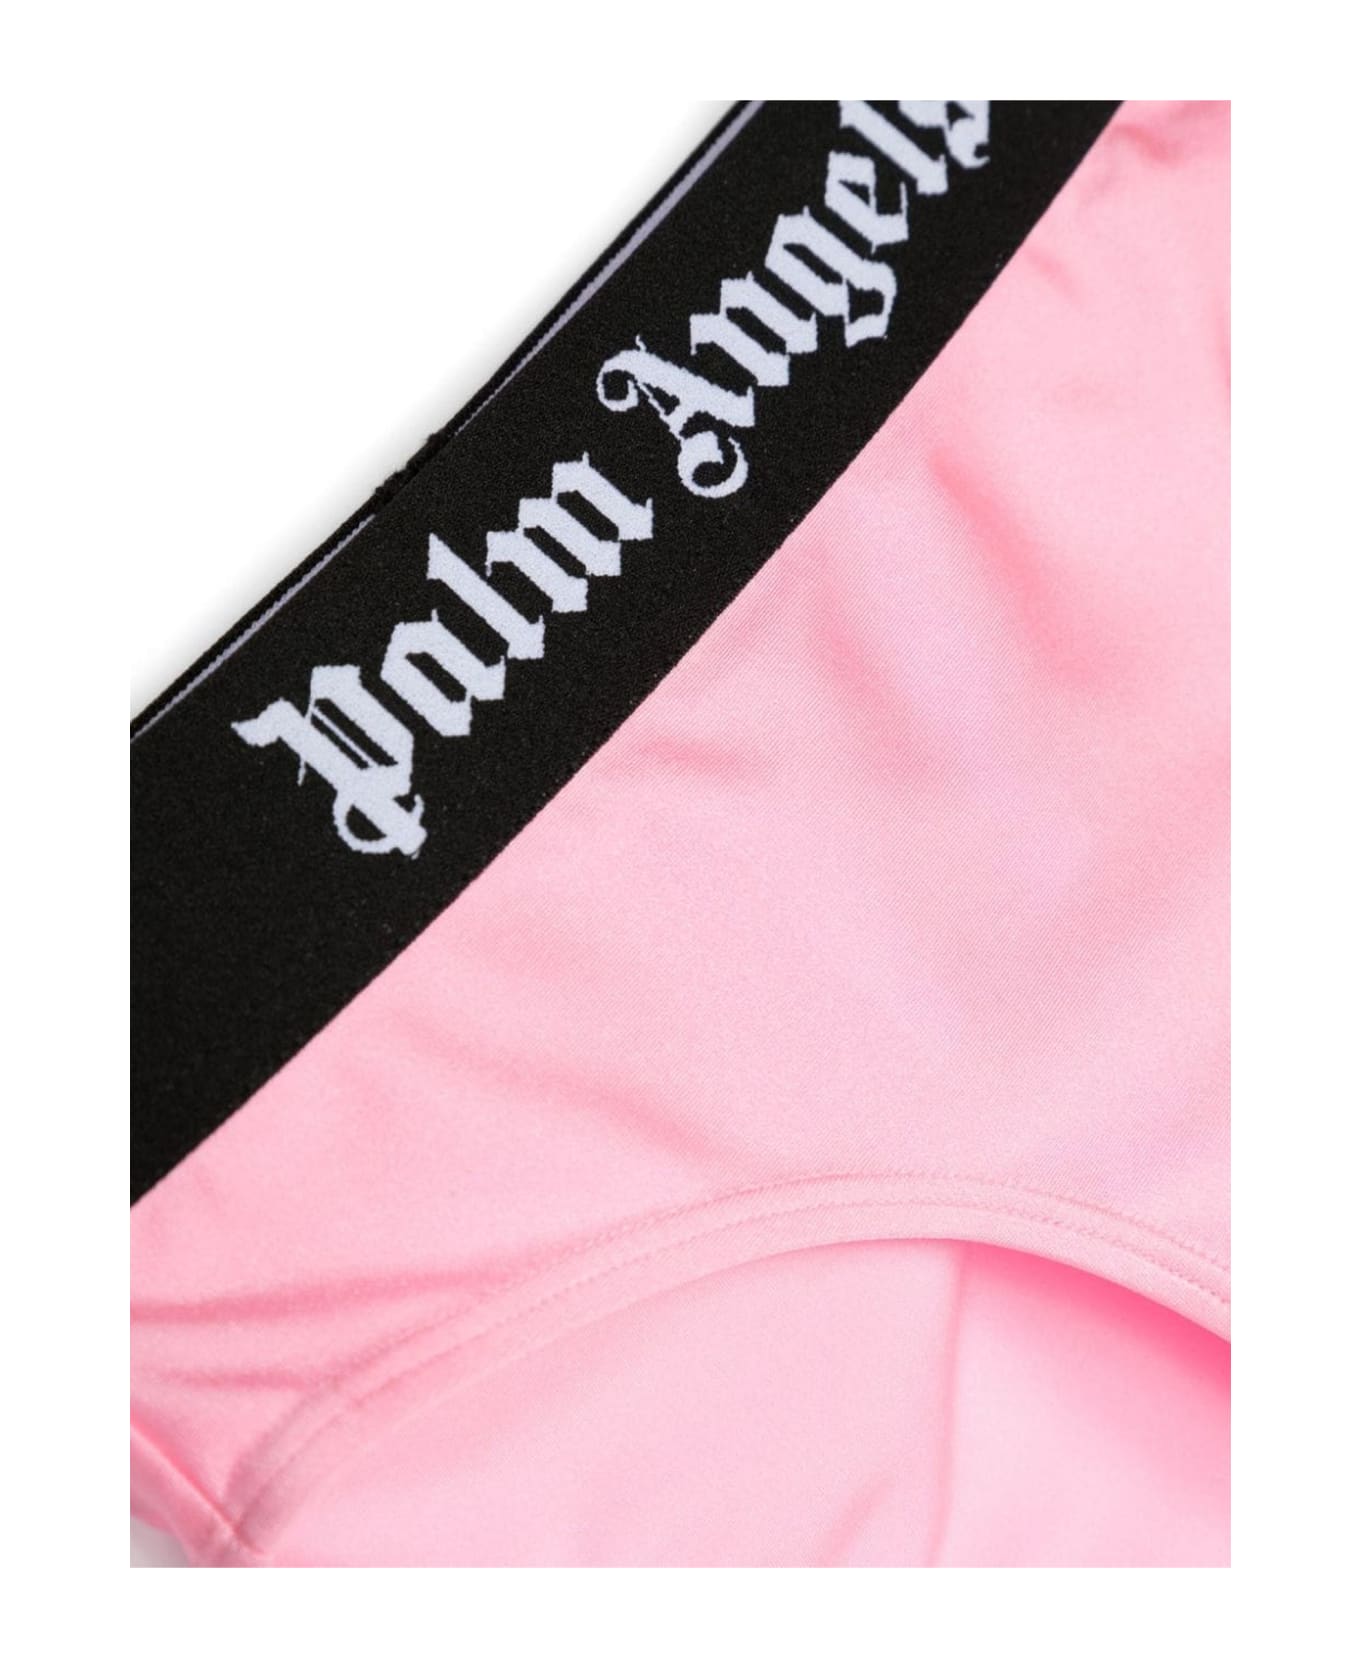 Palm Angels Sea Clothing Pink - Pink